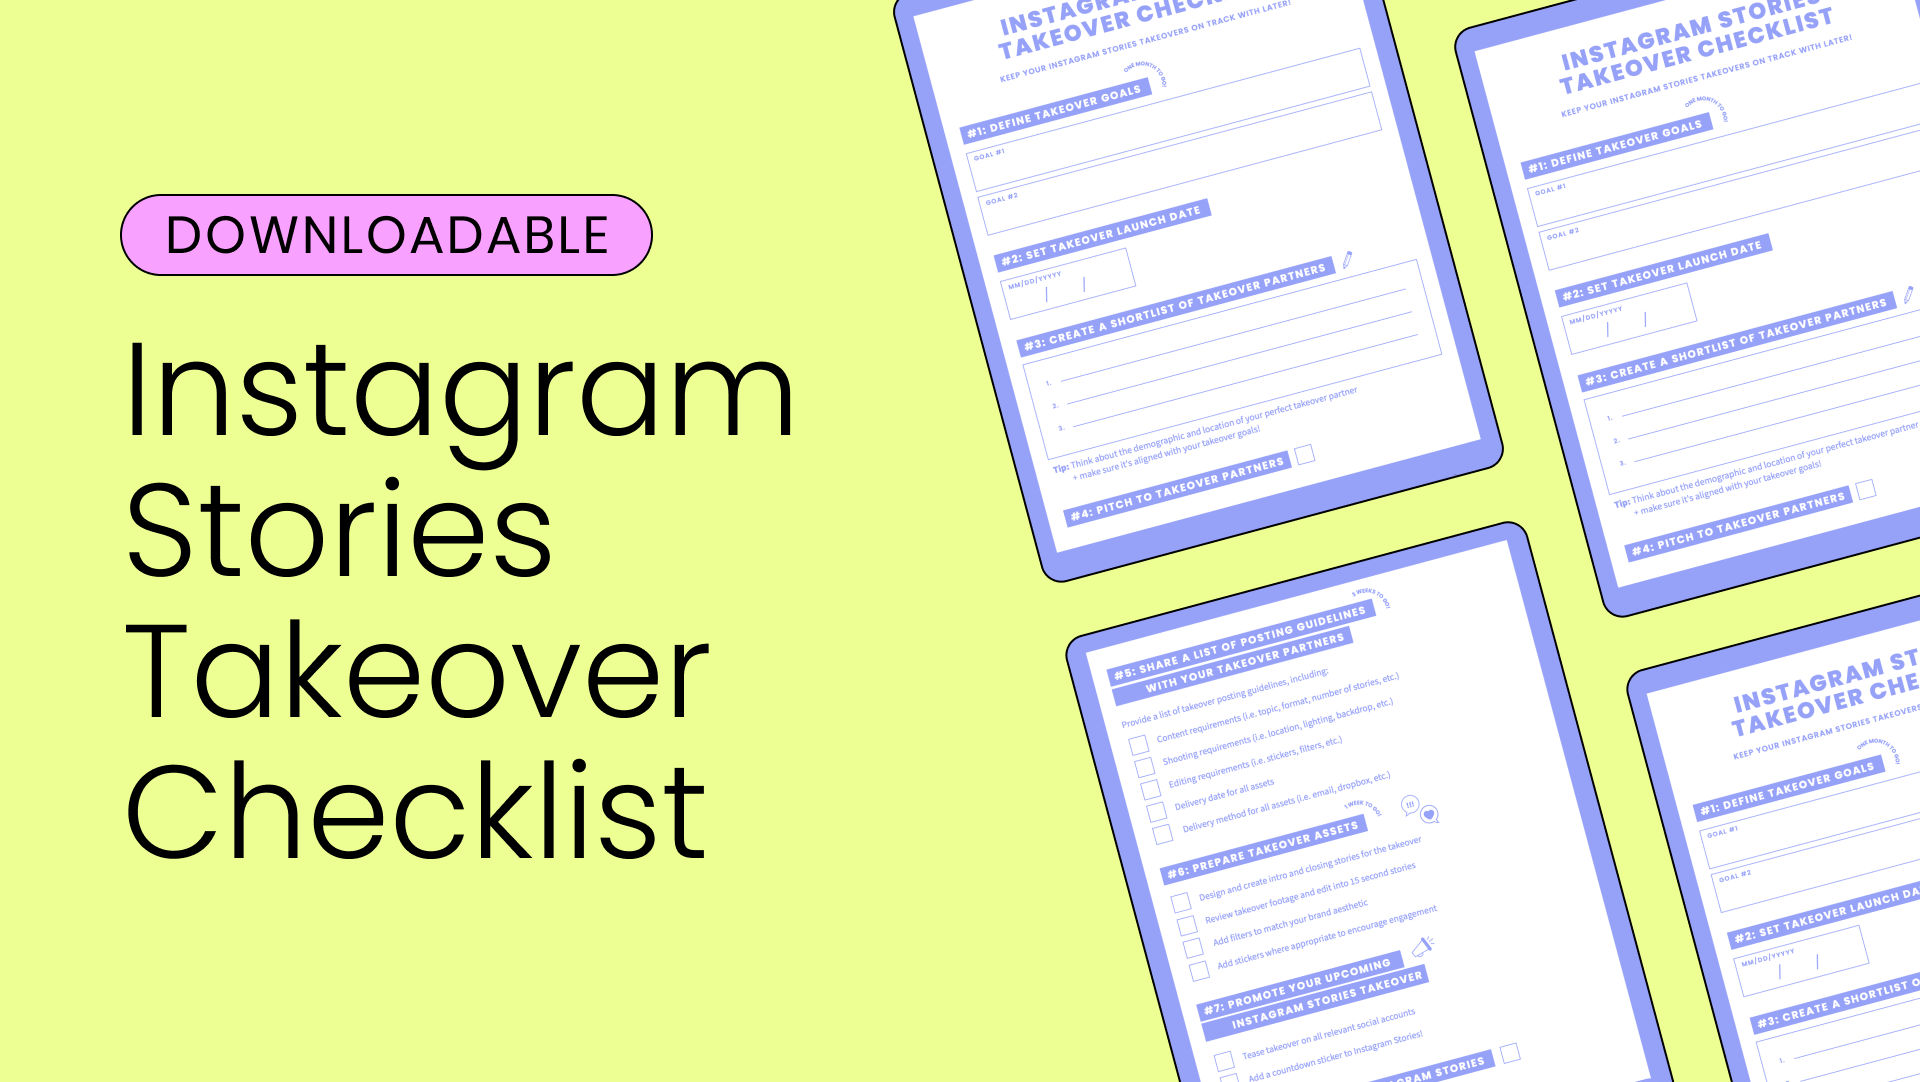 Decorative image reading Downloadable Instagram Stories Takeover Checklist on yellow background with checklist graphic